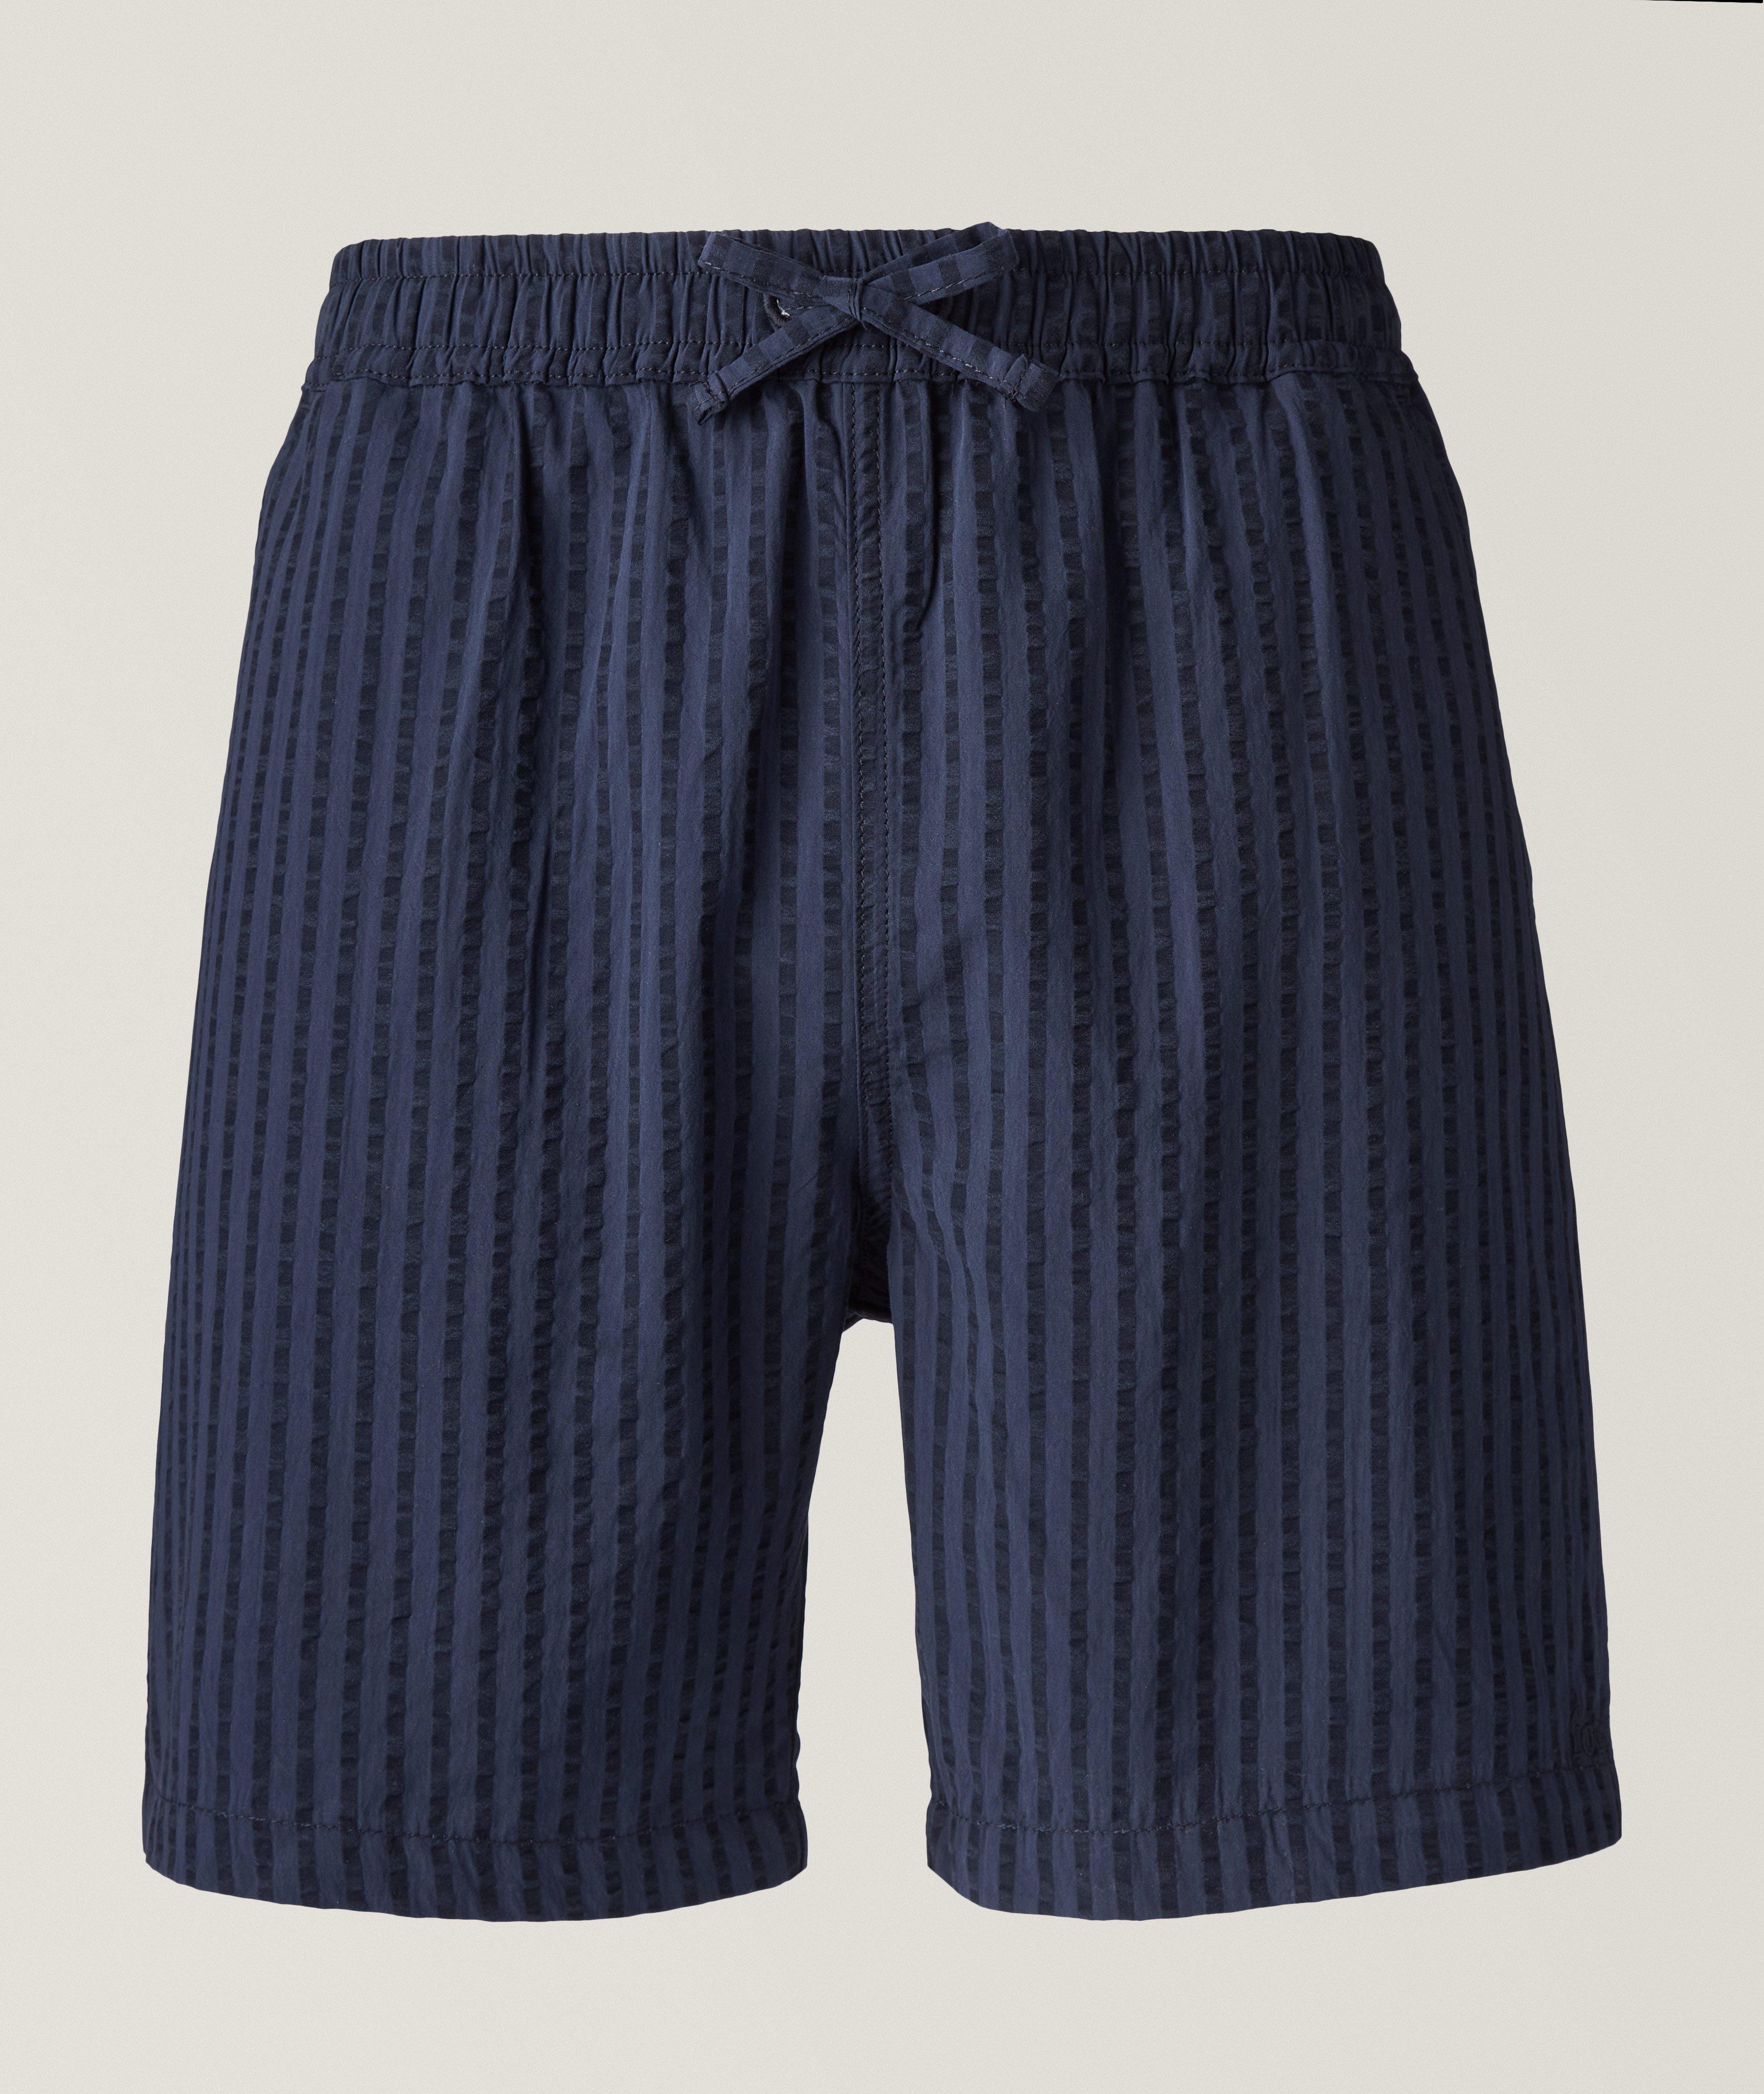 Foret Vole Vertical Striped Shorts